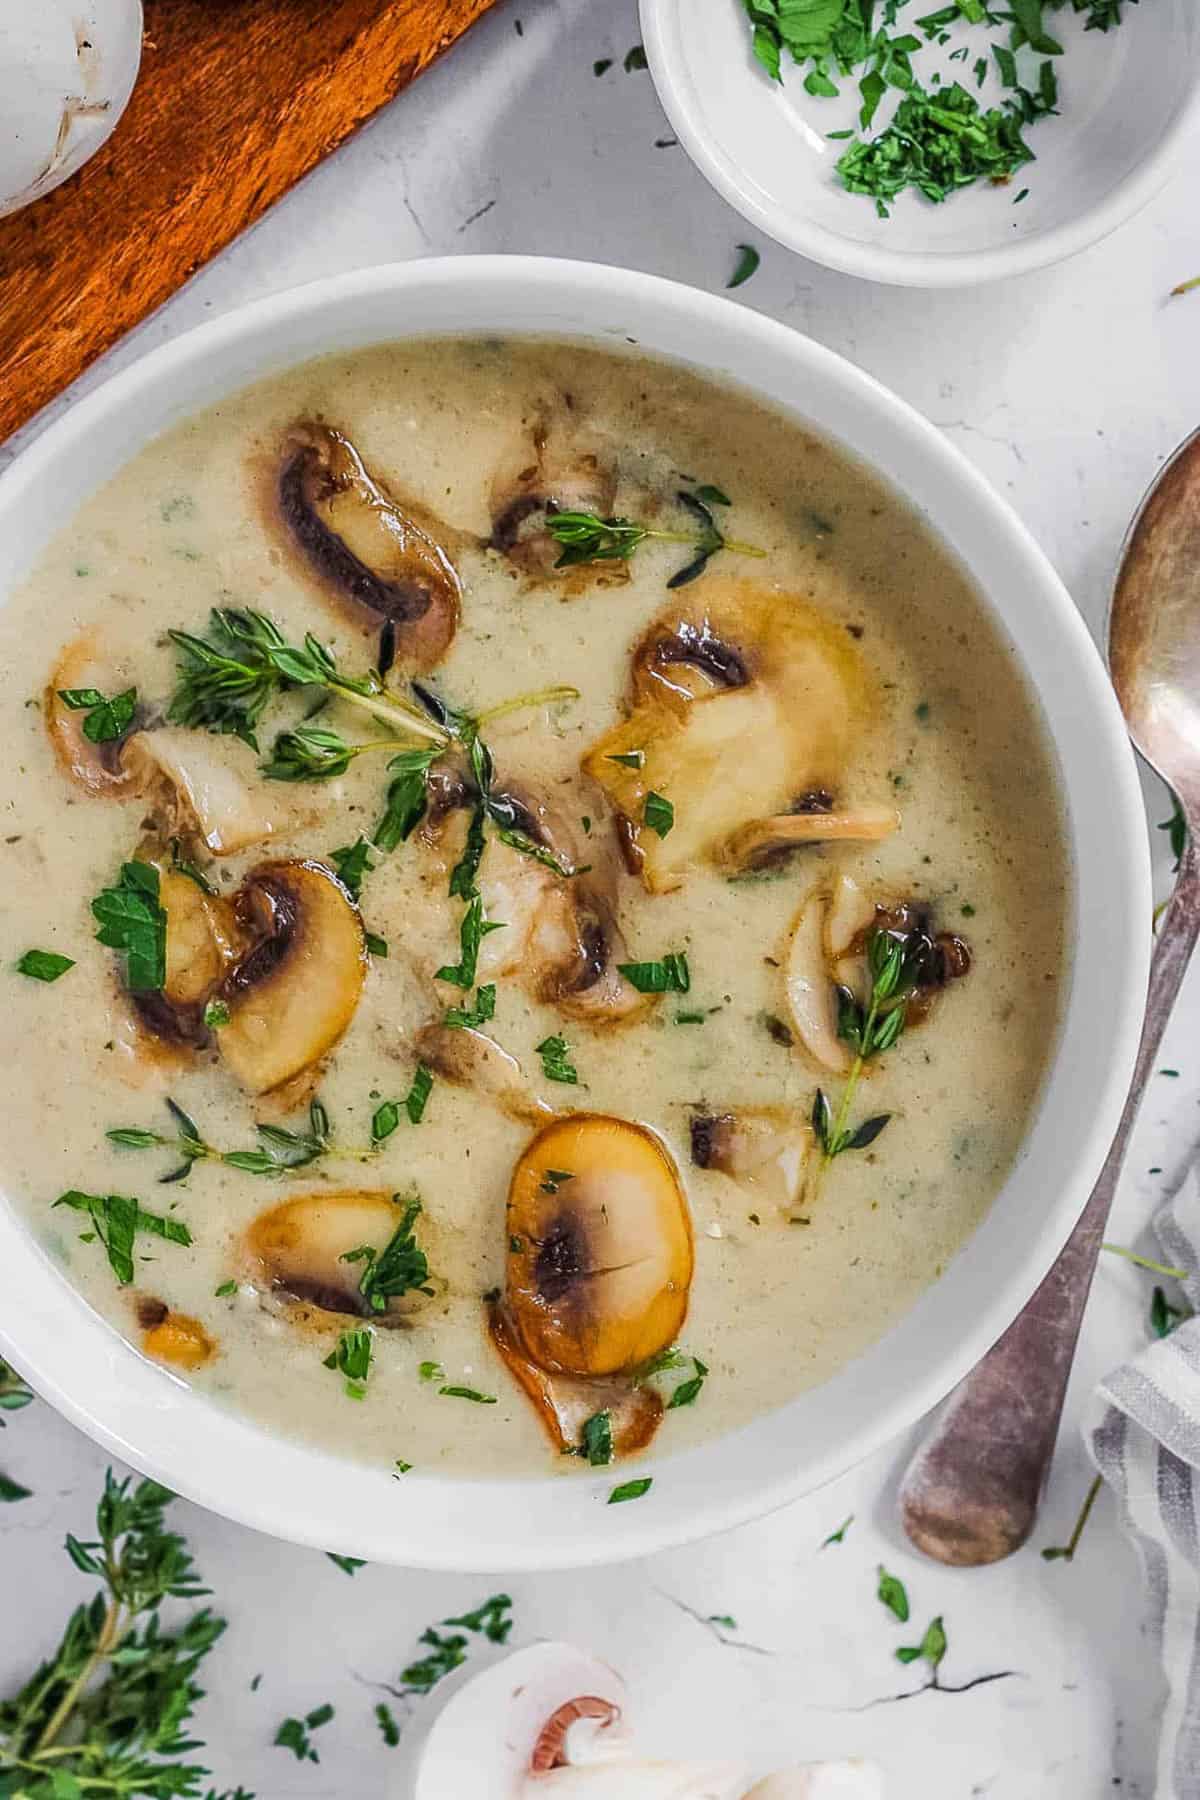 Vegan mushroom soup served in a white bowl with fresh herbs as a garnish.